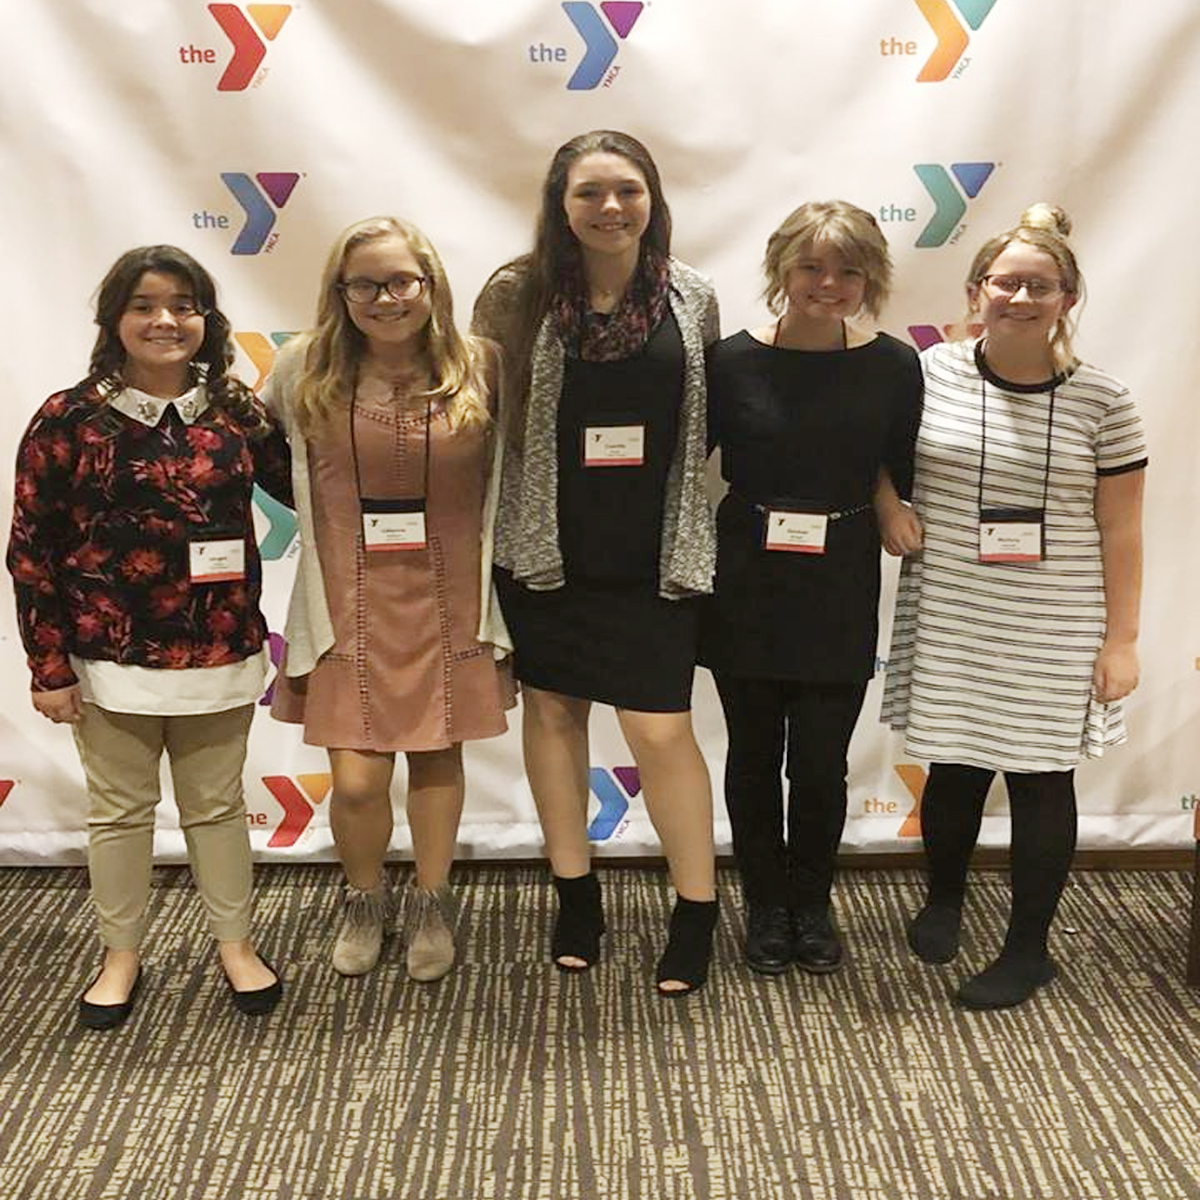 Middle school students Raegan Evans, Lillianna Stafford, Camille Hoop, Kirsten Metzger, and Mallory Holcomb took on the same responsibilities as those who currently work in state government through hands-on legislative experiences.